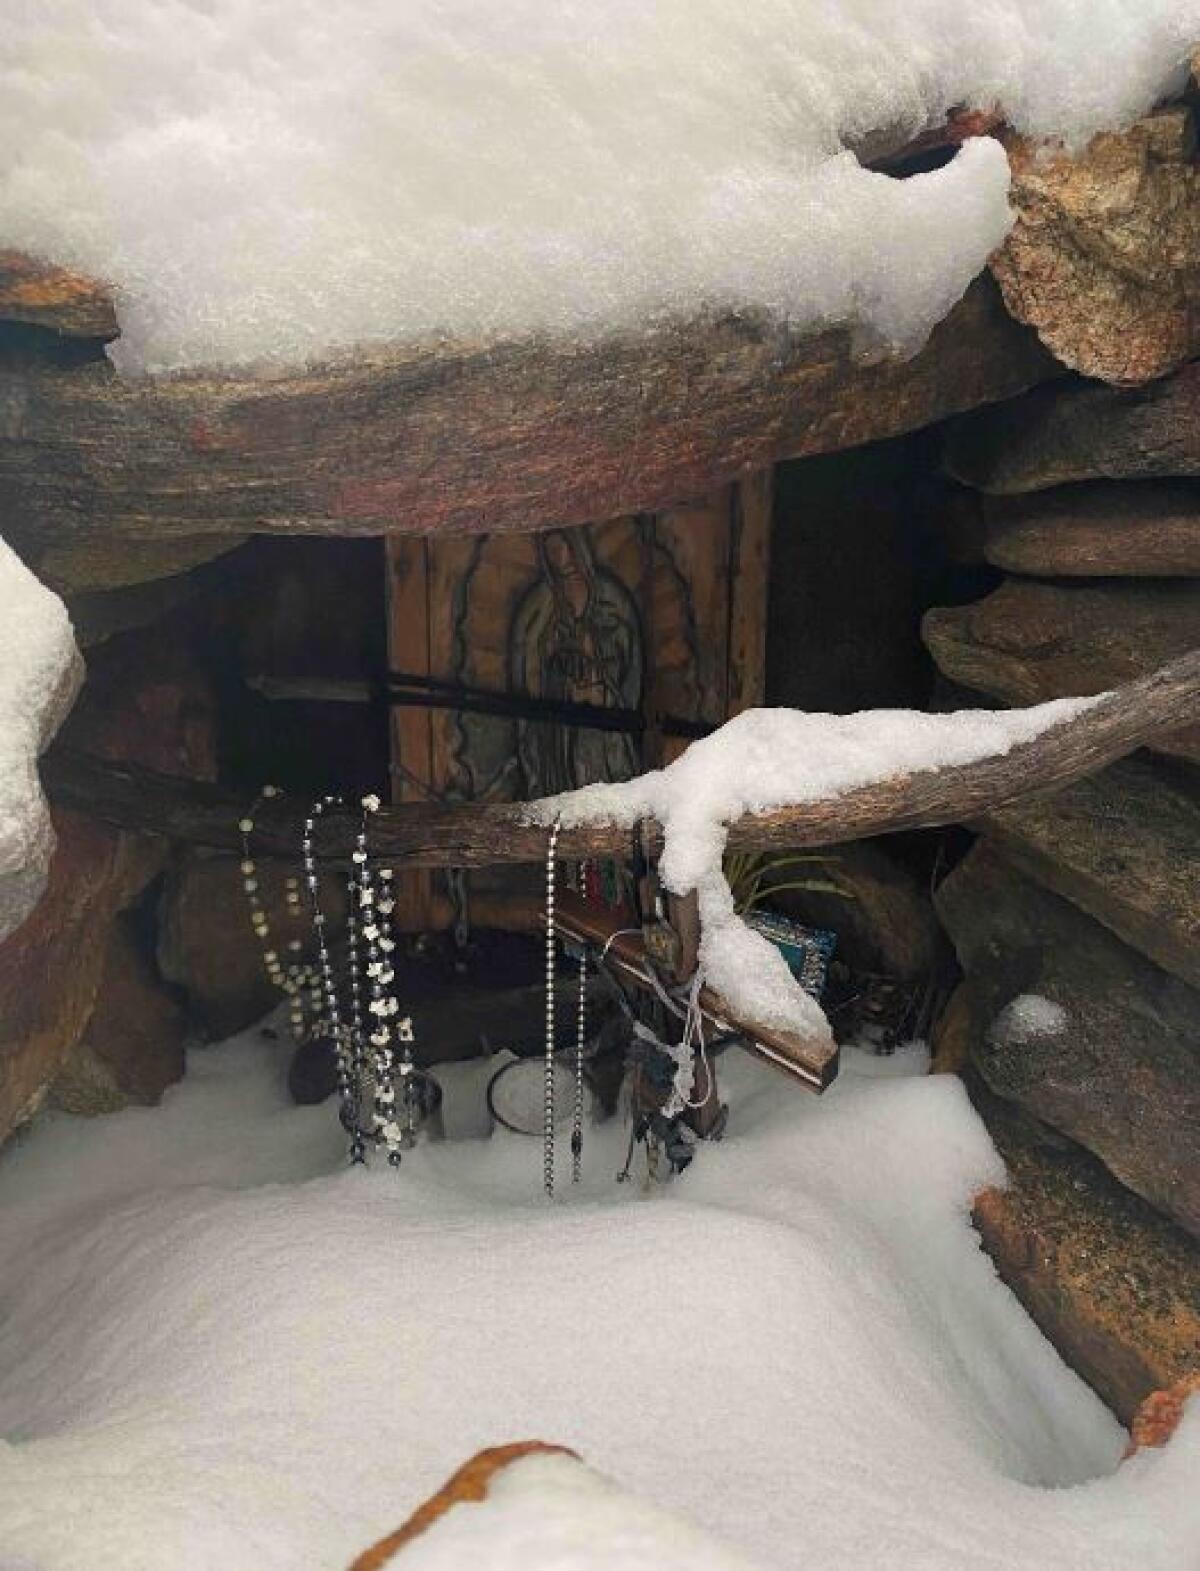 A snow-covered shrine to the Virgen de Guadalupe in the mountains southeast of Mount Laguna.